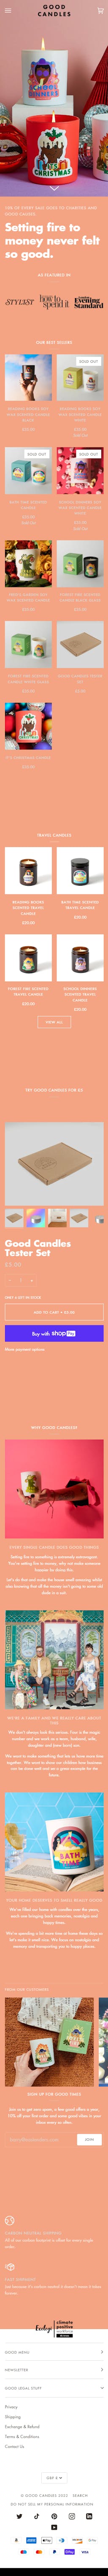 Good Candles